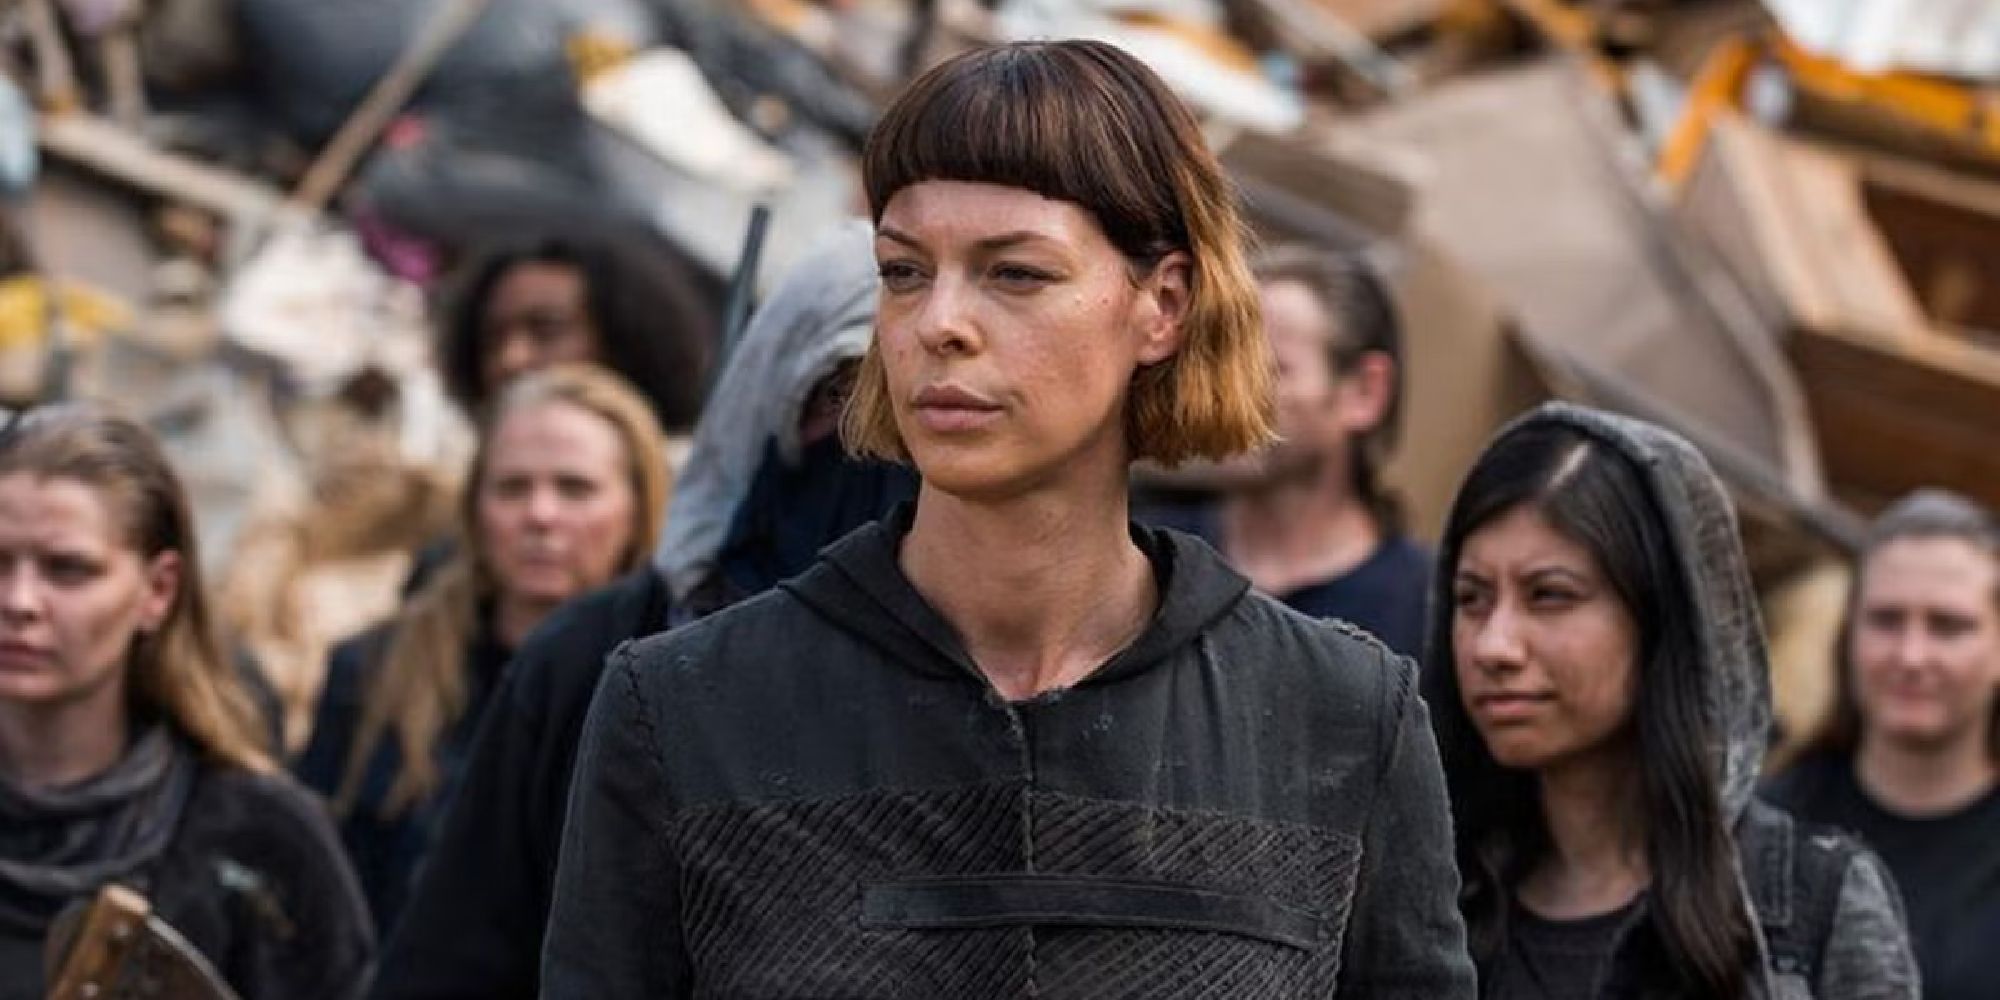 Jadis standing with the rest of the scavengers in The Walking Dead